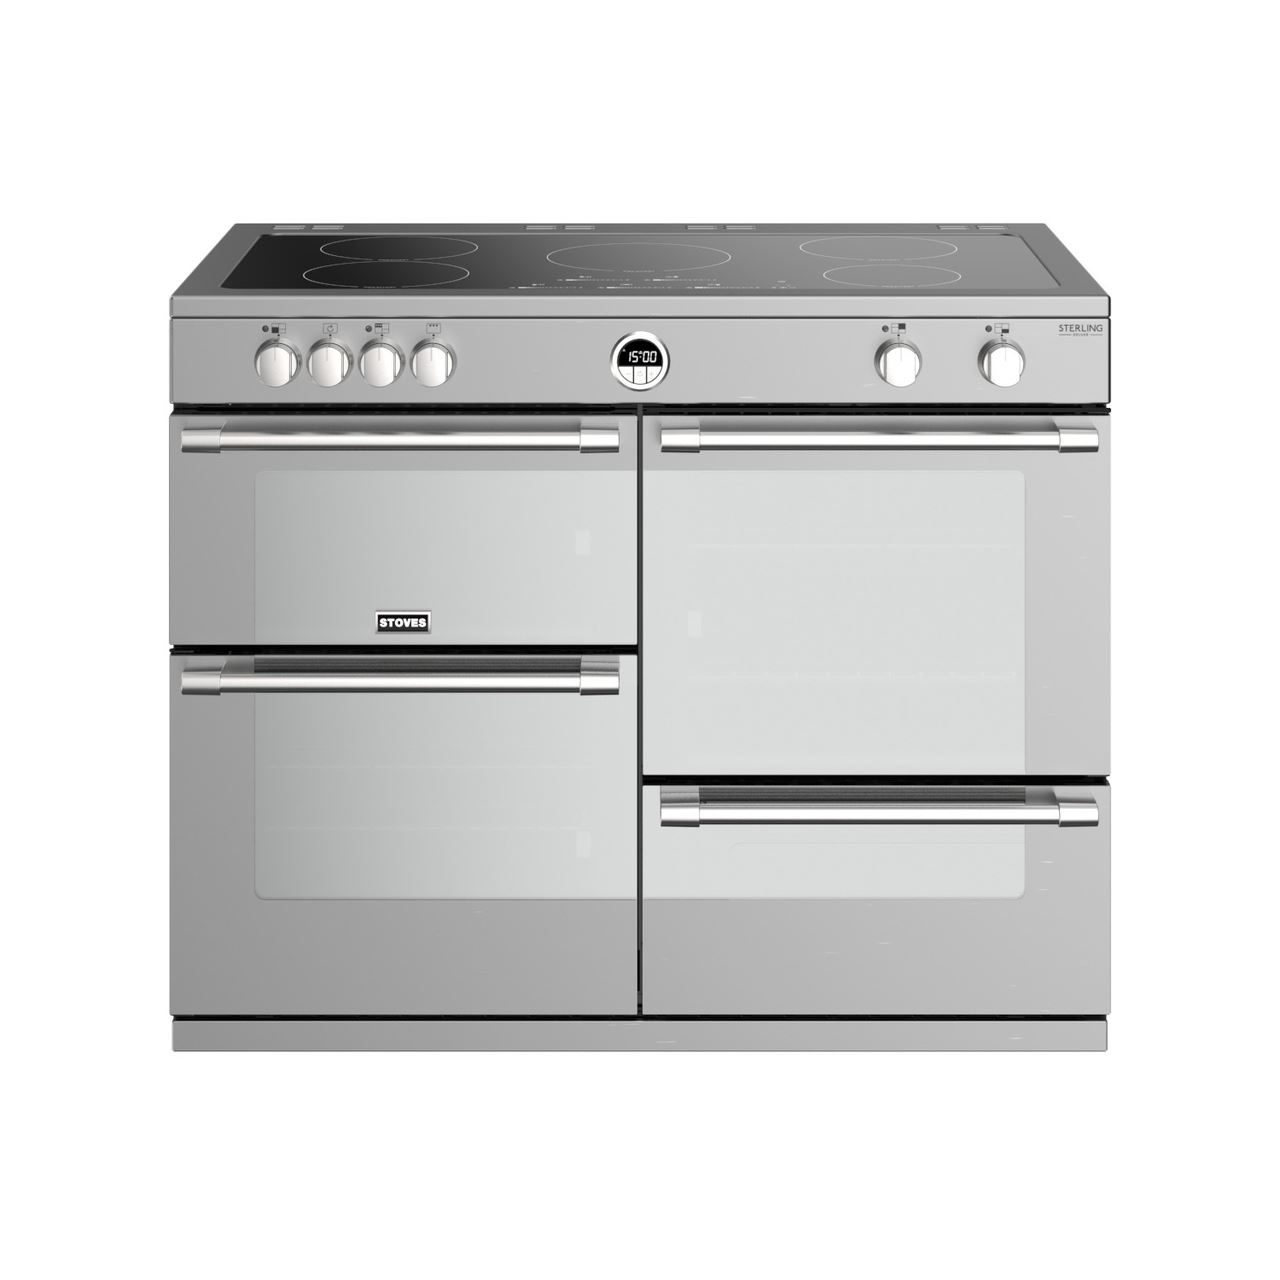 Piano de cuisson induction Sterling Deluxe 110 EI inox Stoves - PSTERDX110EISS